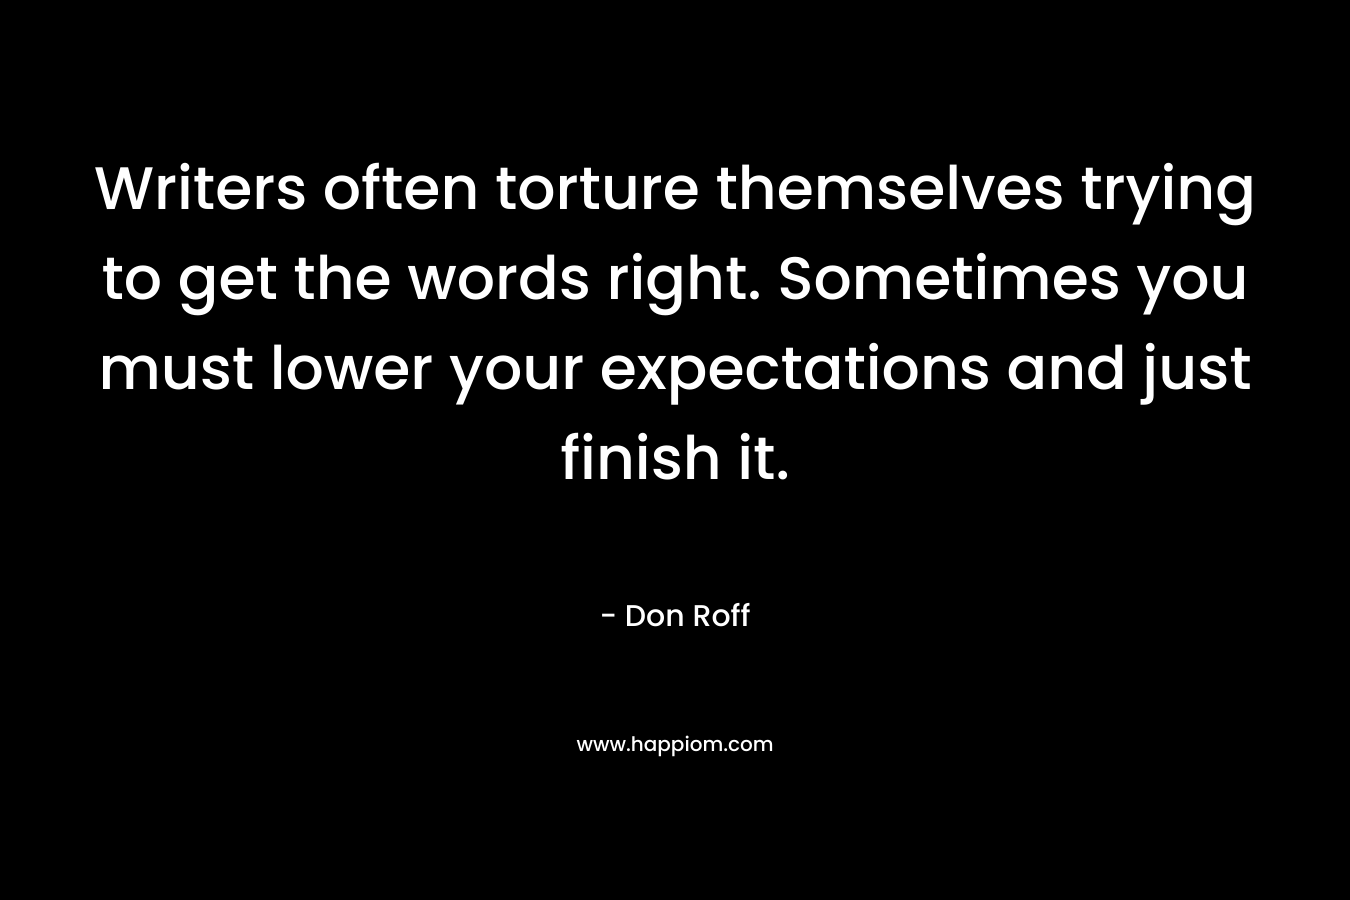 Writers often torture themselves trying to get the words right. Sometimes you must lower your expectations and just finish it. – Don Roff